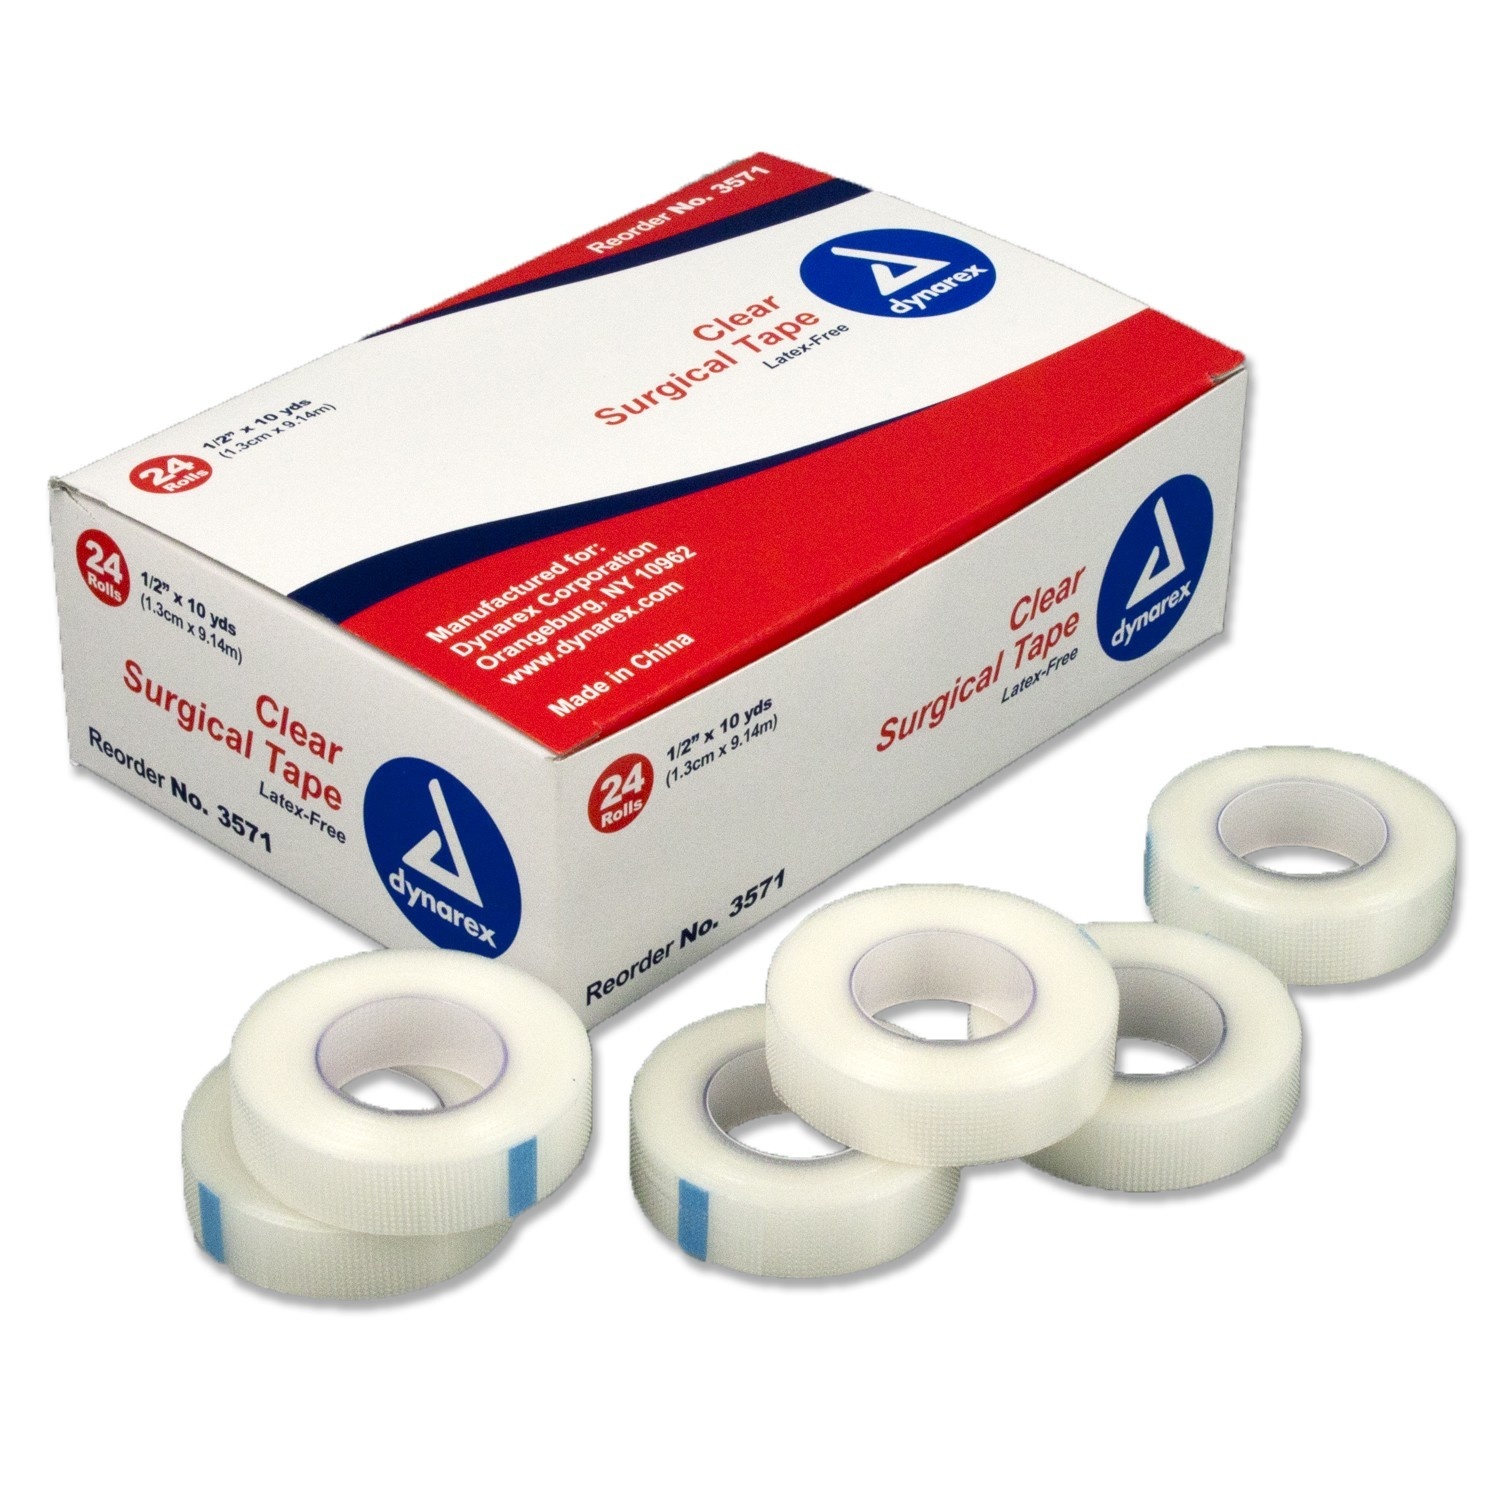 Dynarex Surgical Tape Clear 1/2” x10yards